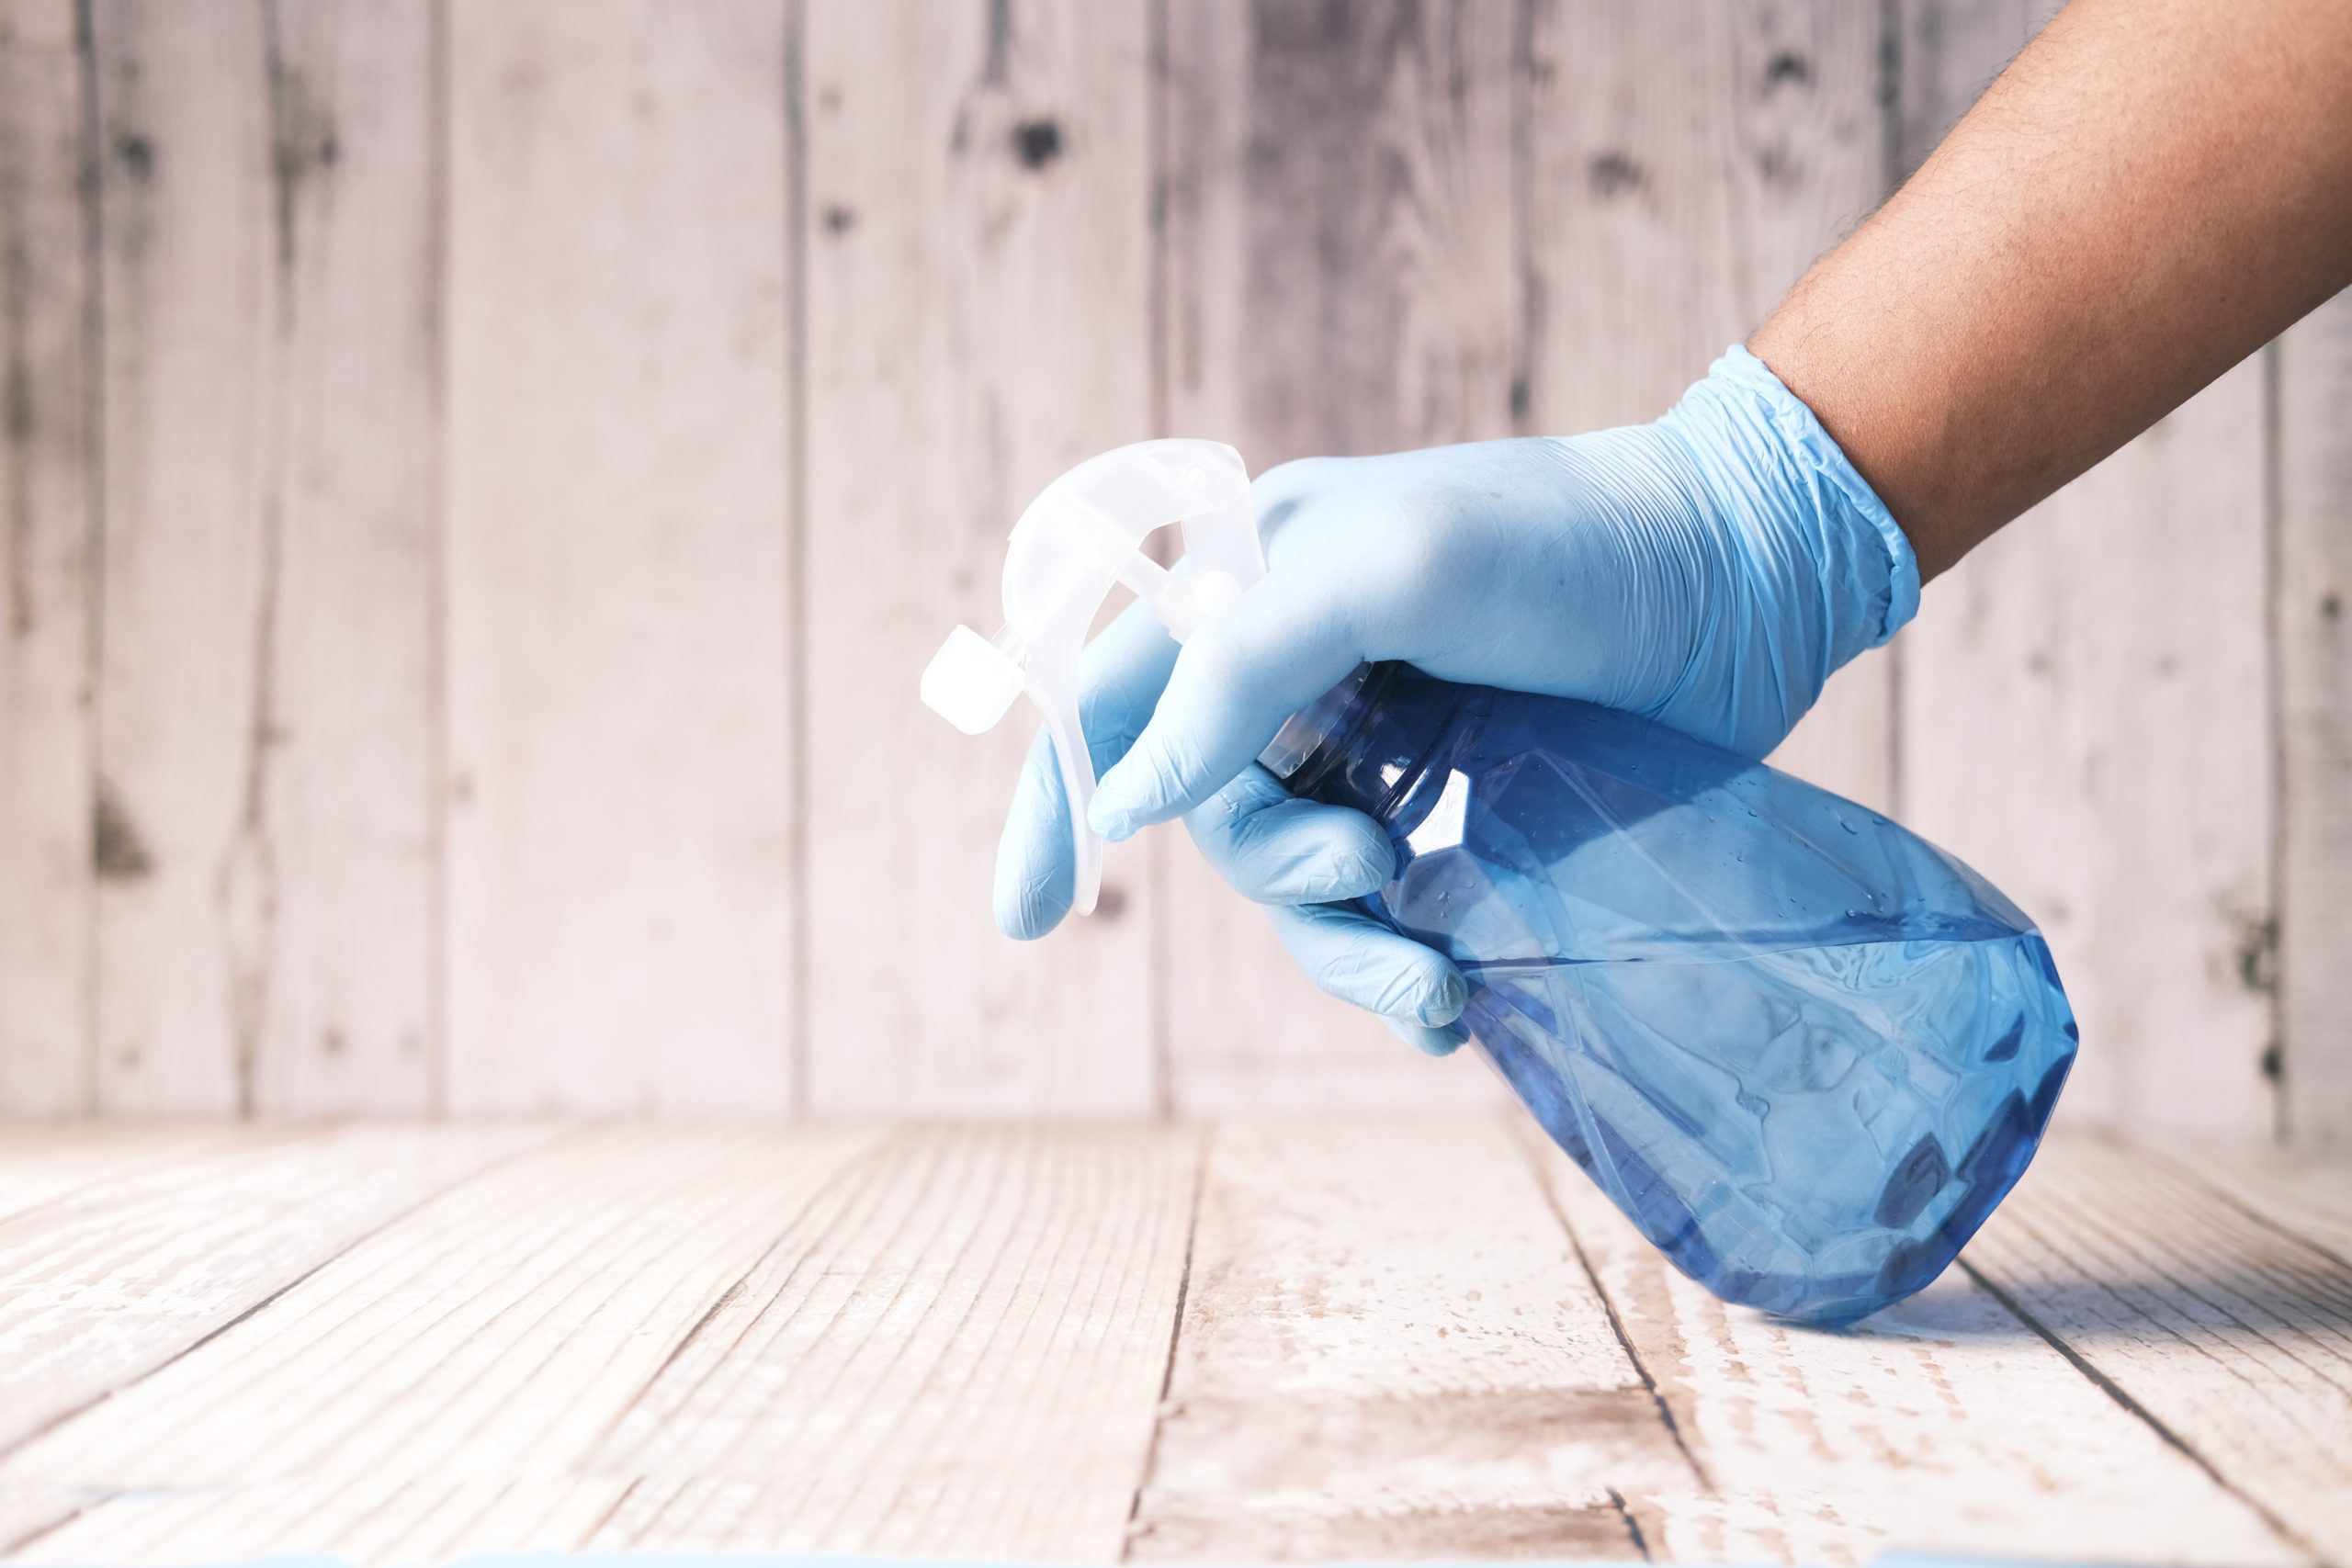 10 Things You Can Clean With Baking Soda and Vinegar - The Daily DIY